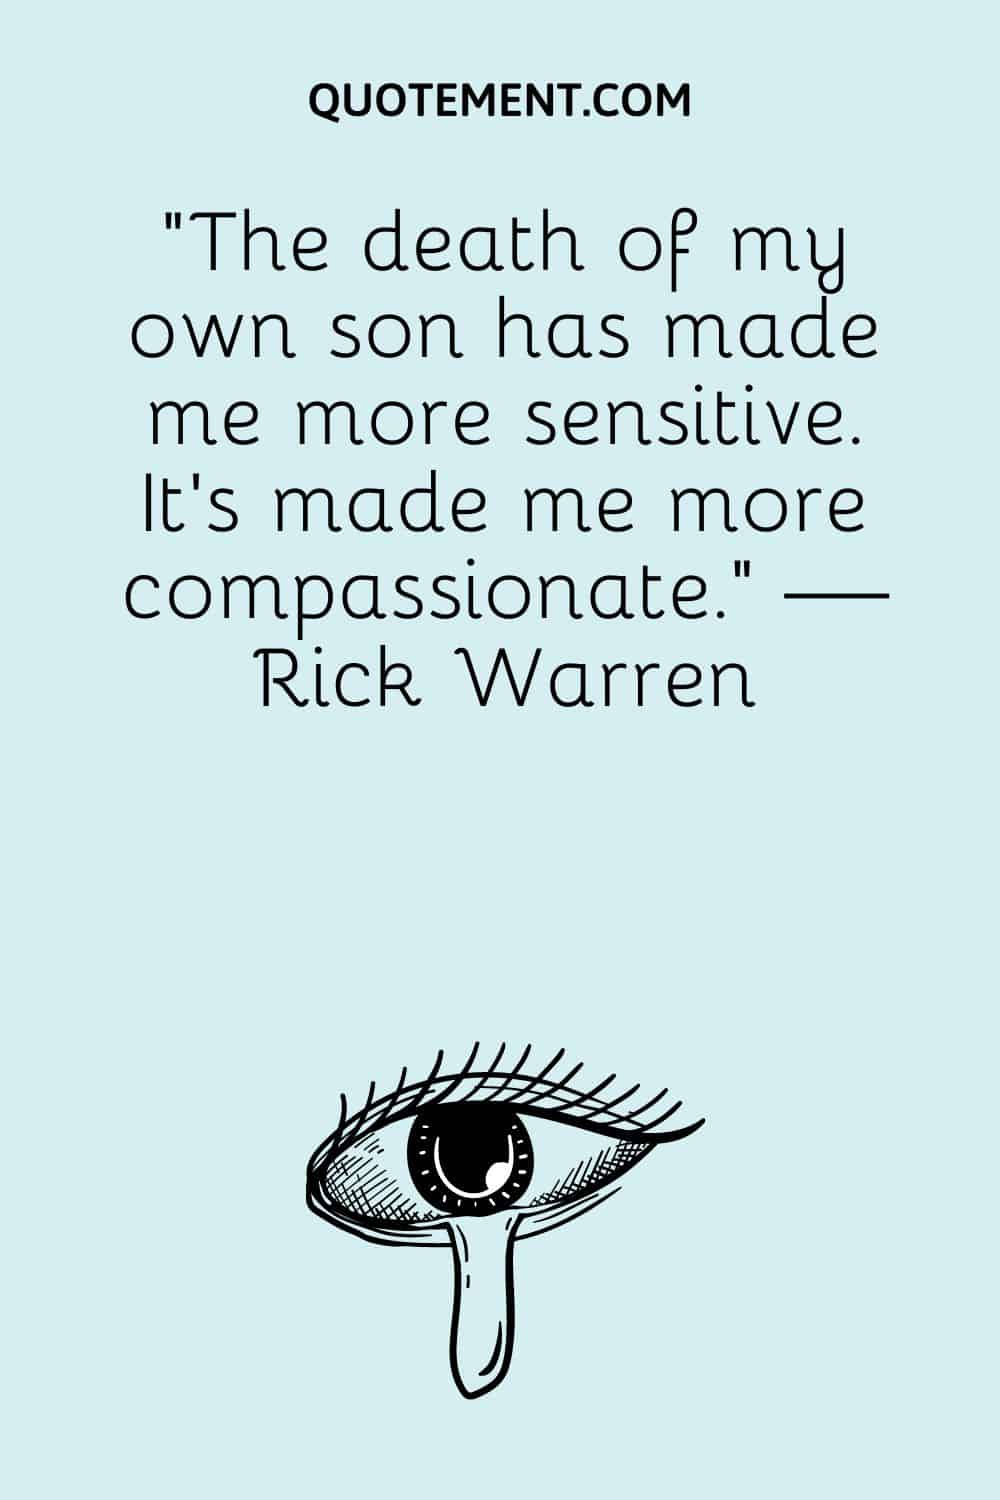 “The death of my own son has made me more sensitive. It’s made me more compassionate.” — Rick Warren